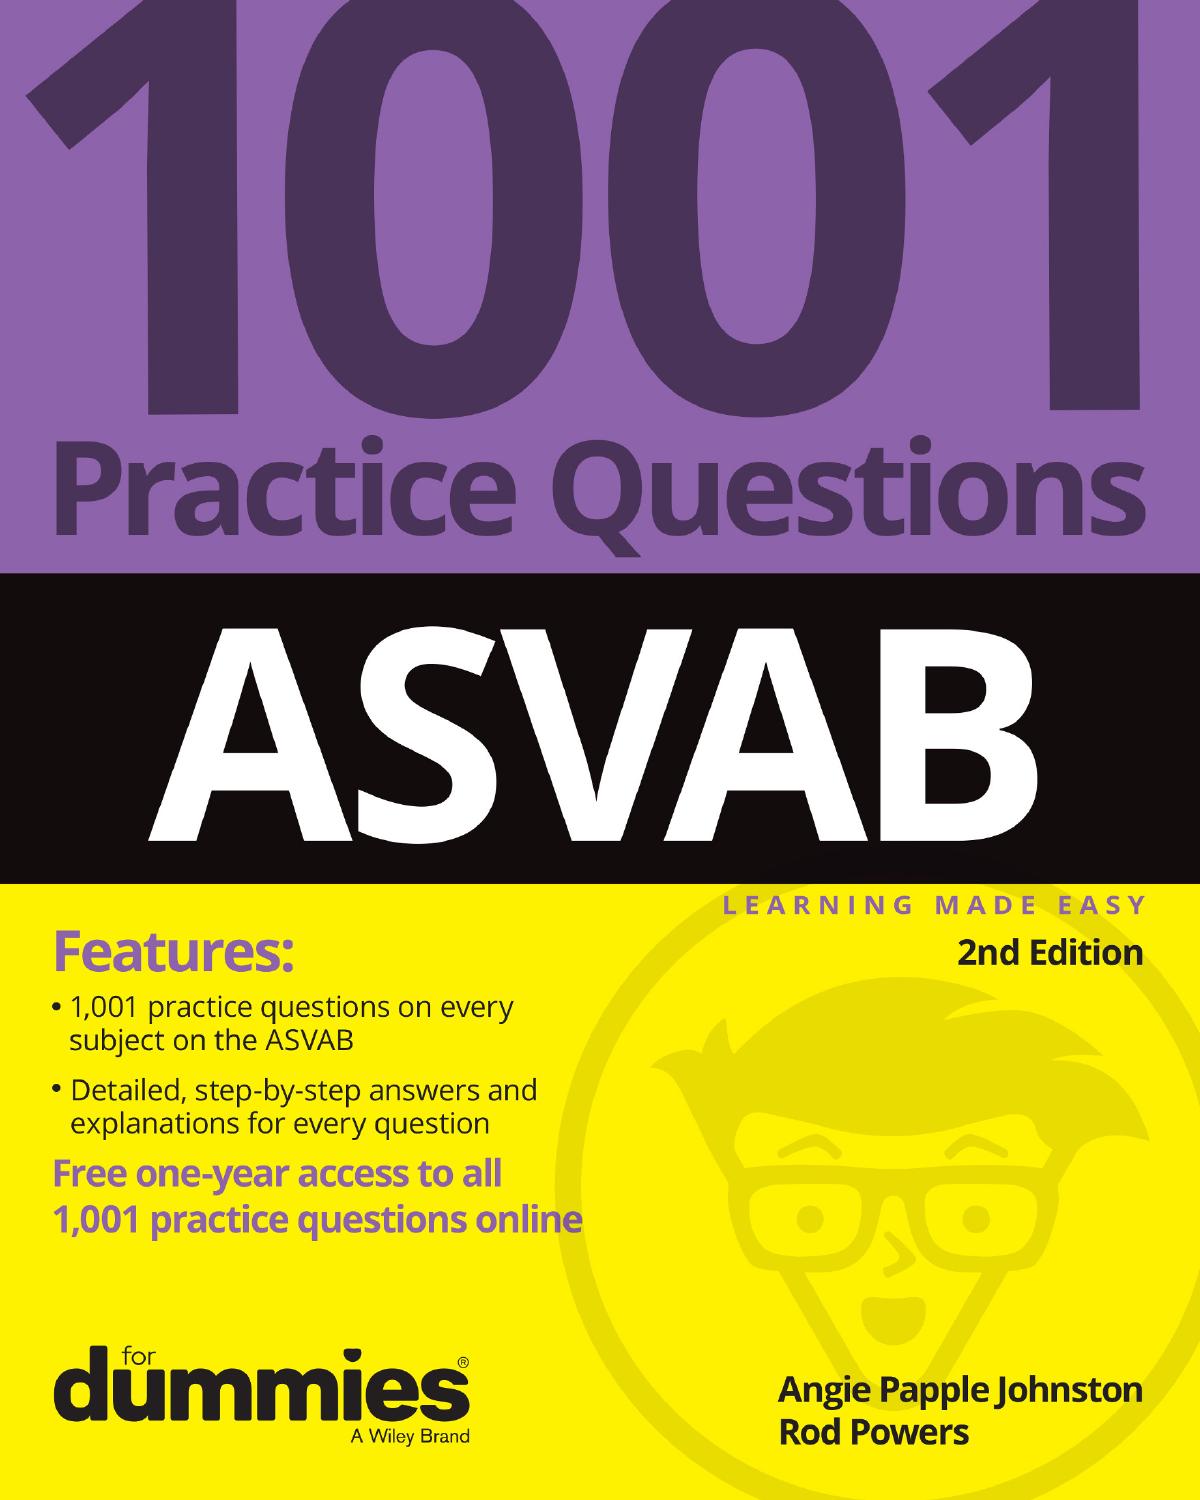 ASVAB: 1001 Practice Questions For DummiesÂ®, 2nd Edition by Angie Papple Johnston and Rod Powers